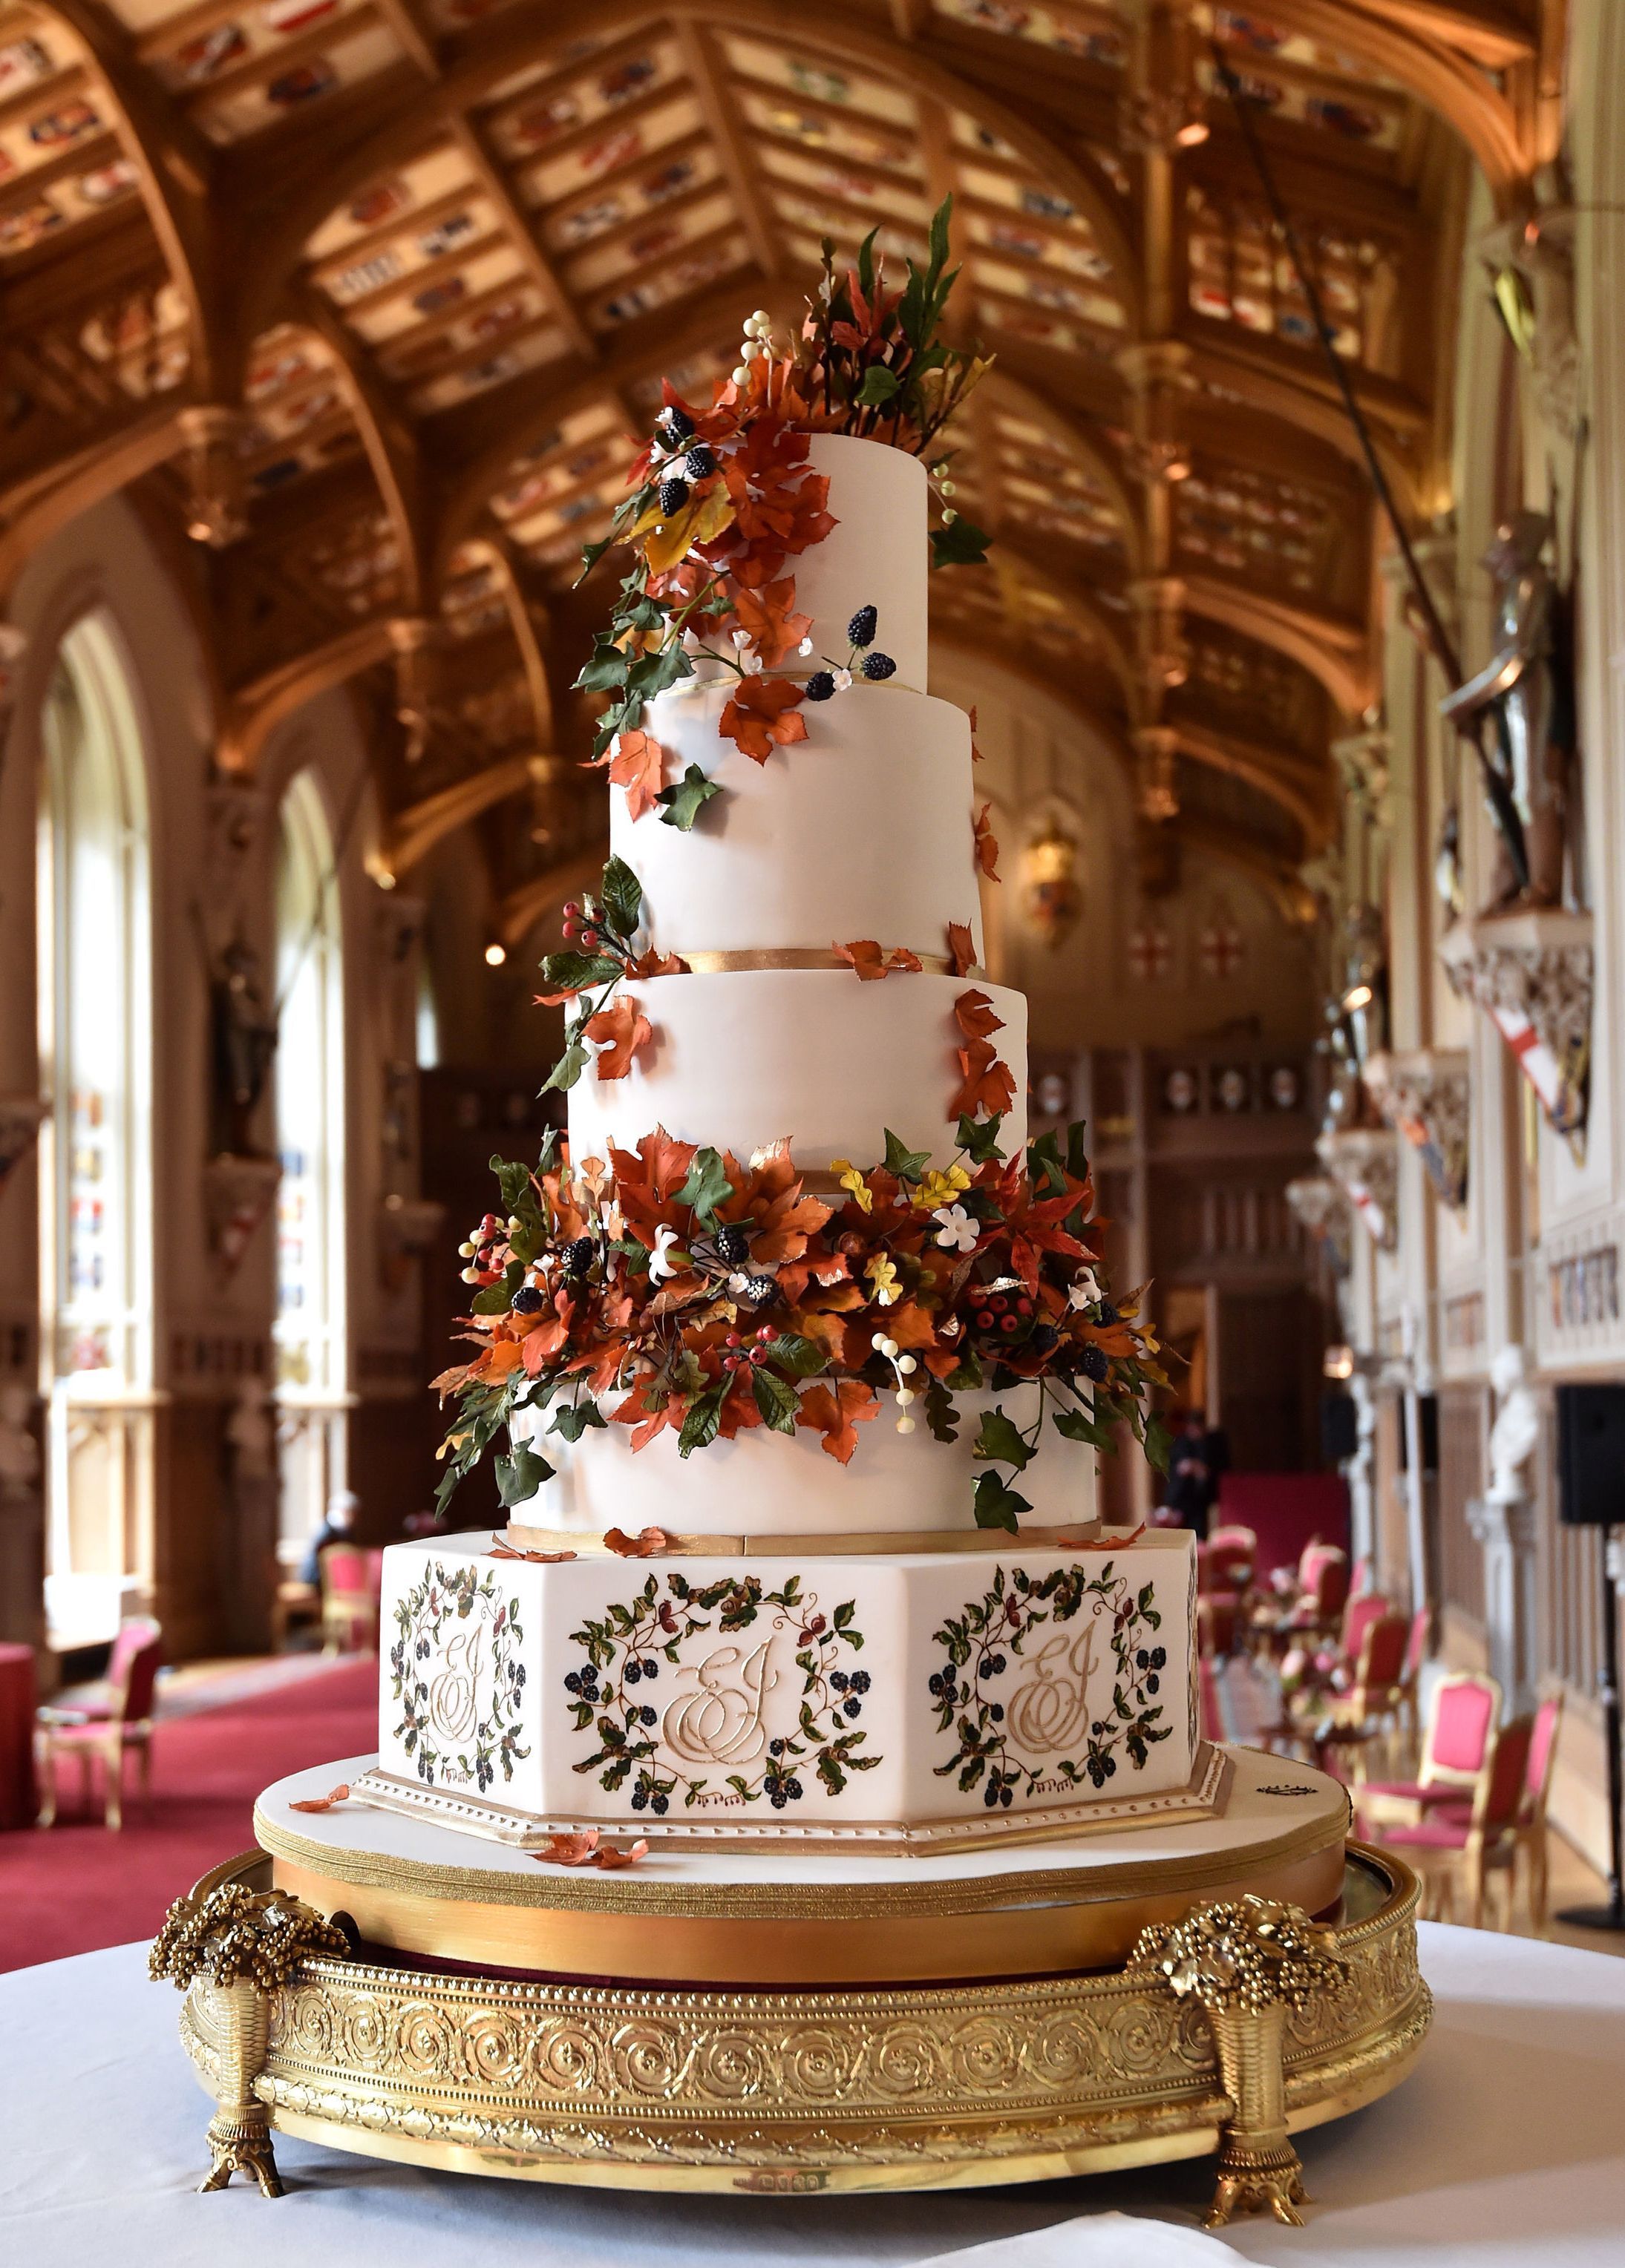 British Royal Wedding Cakes Through the Ages